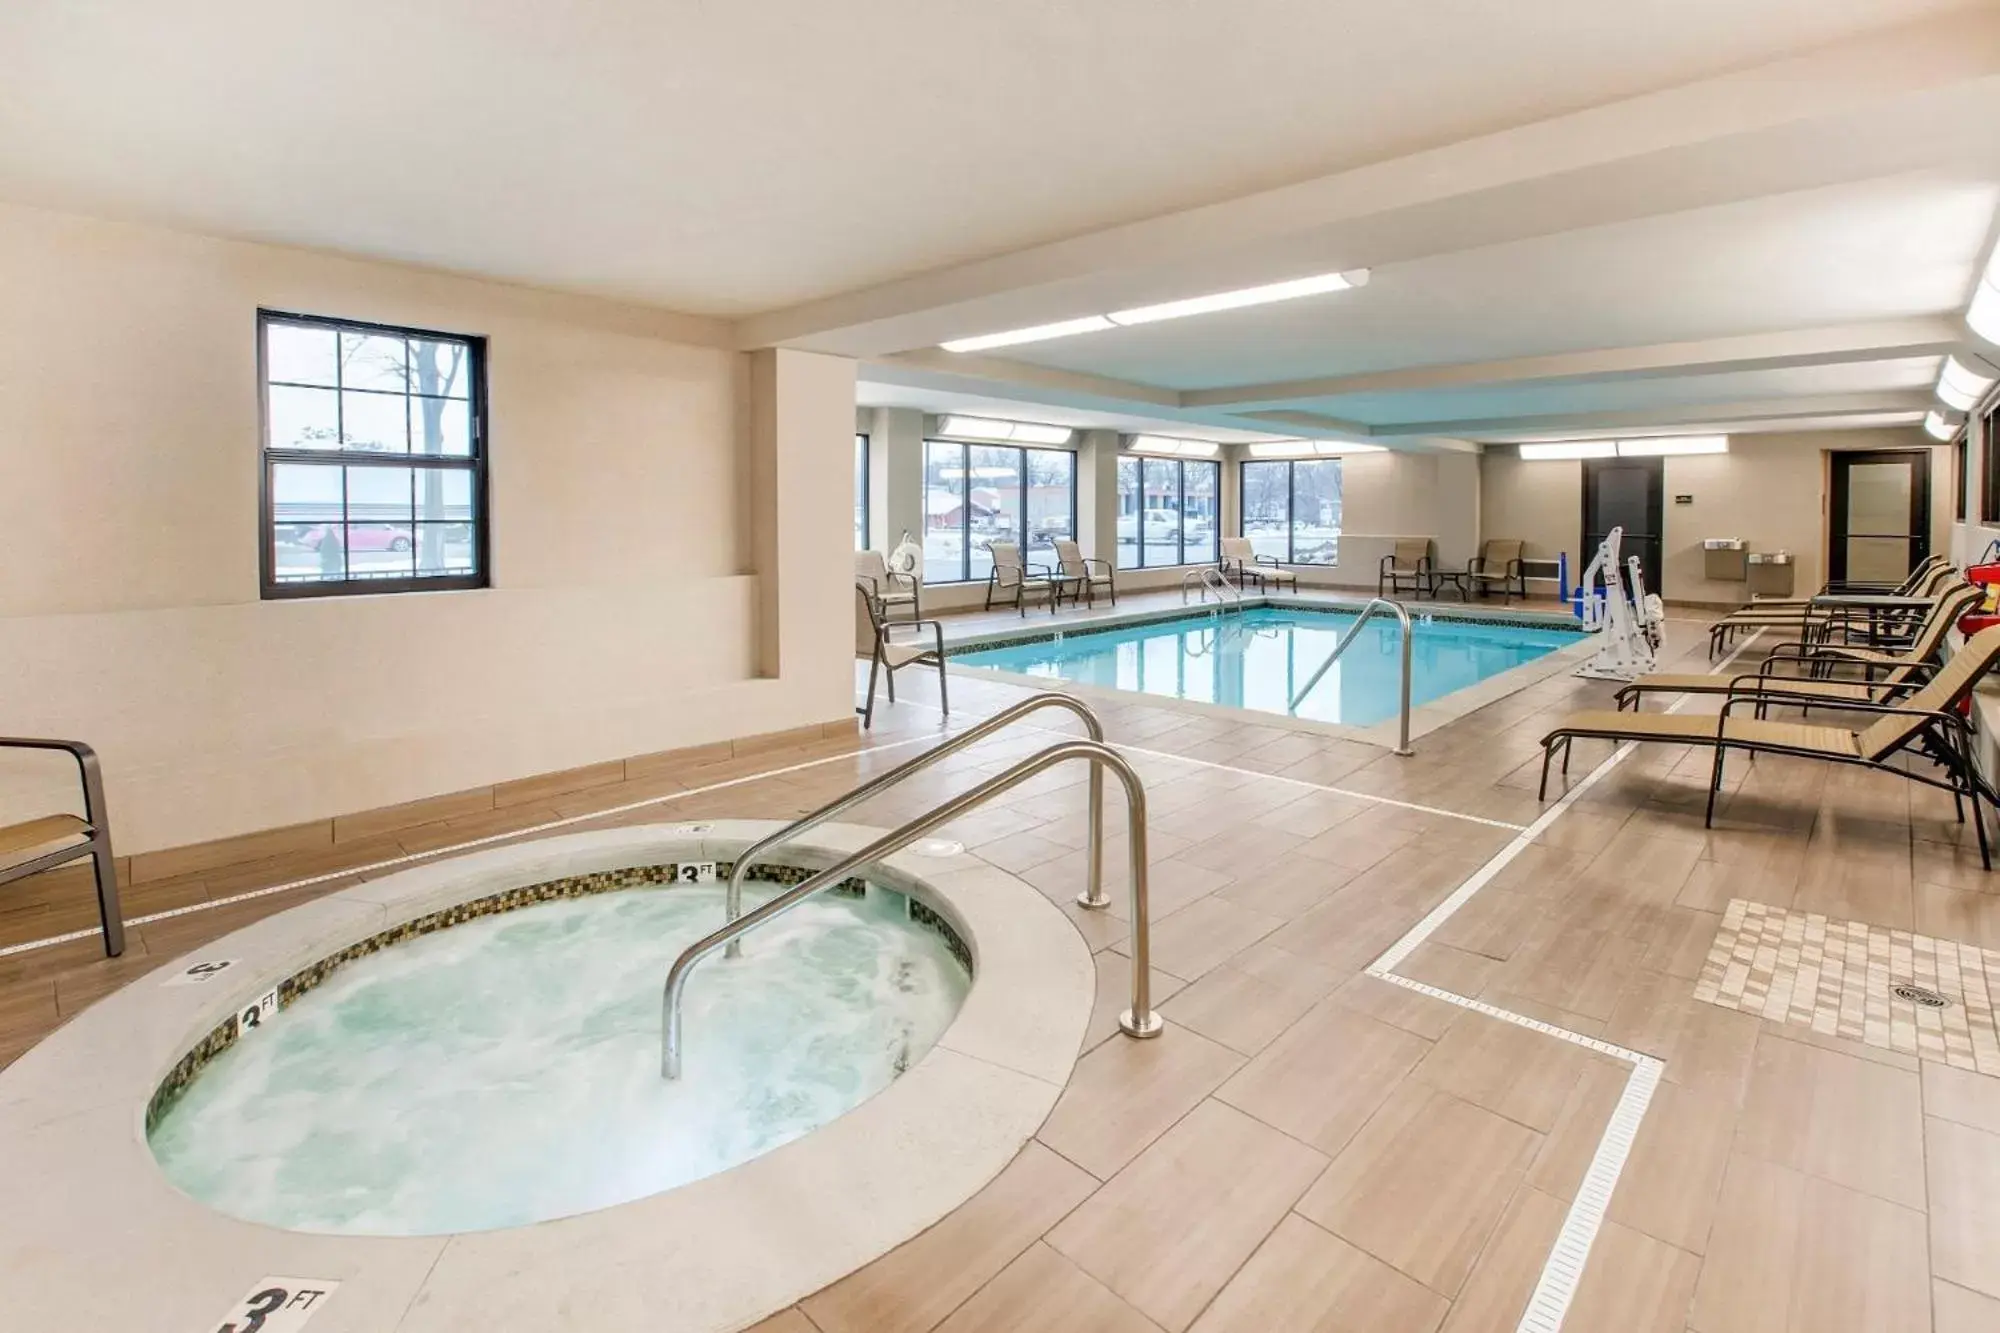 Swimming Pool in Country Inn & Suites by Radisson, Grandville-Grand Rapids West, MI